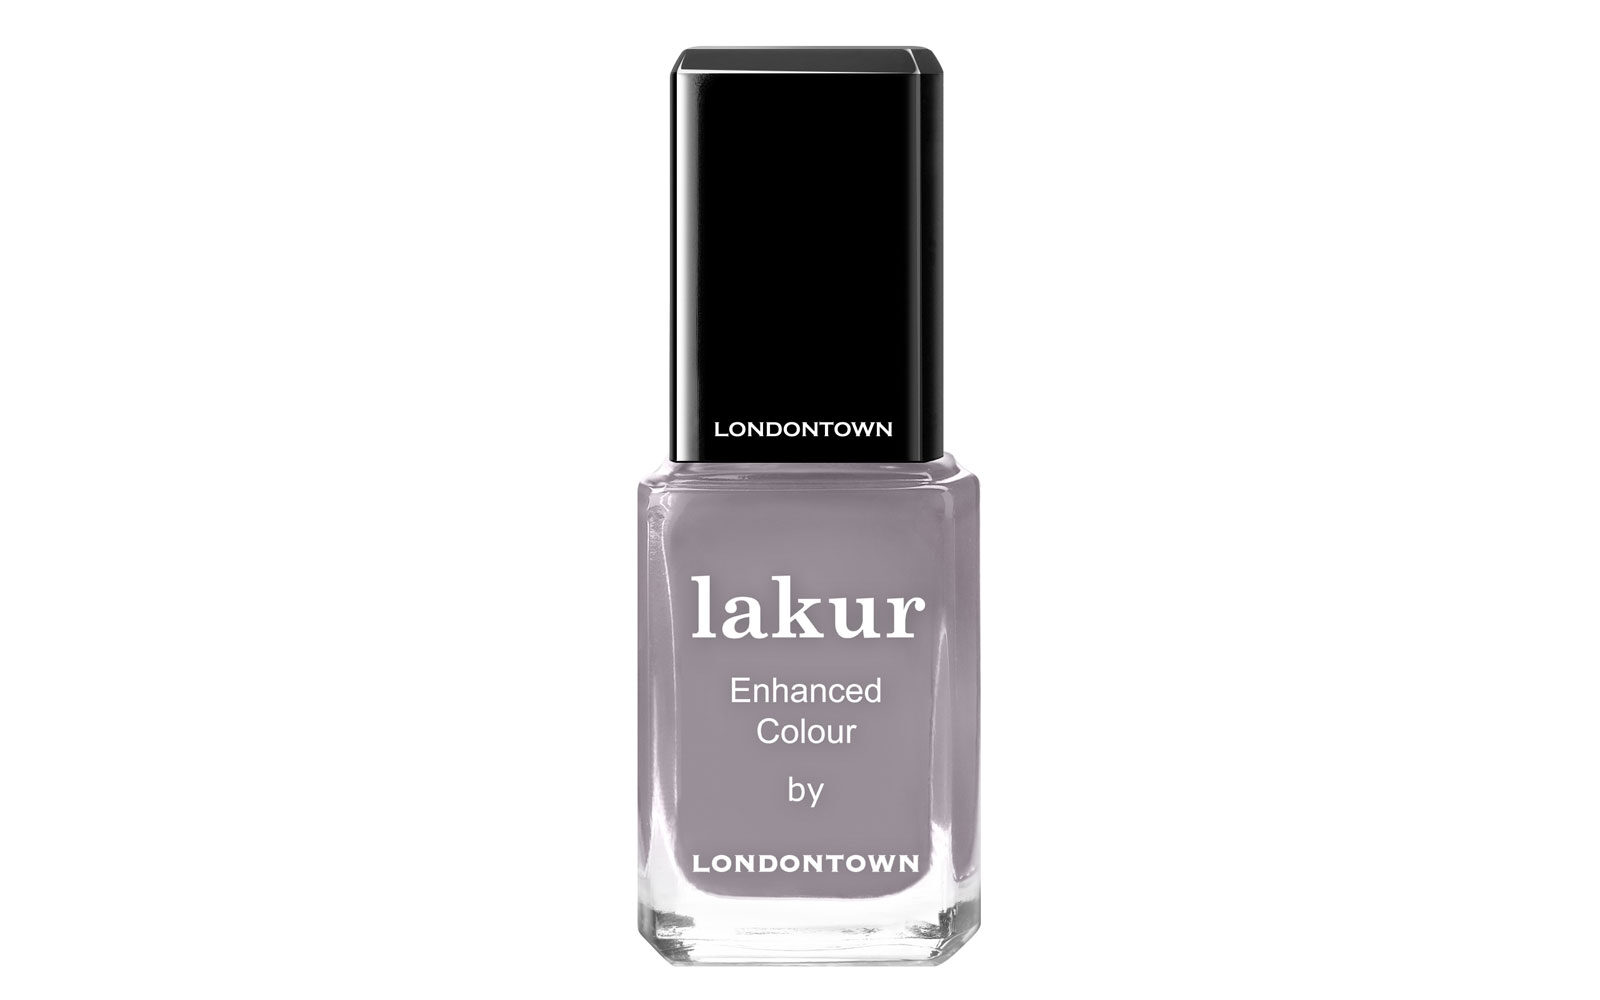 lakur by Londontown Cashmere